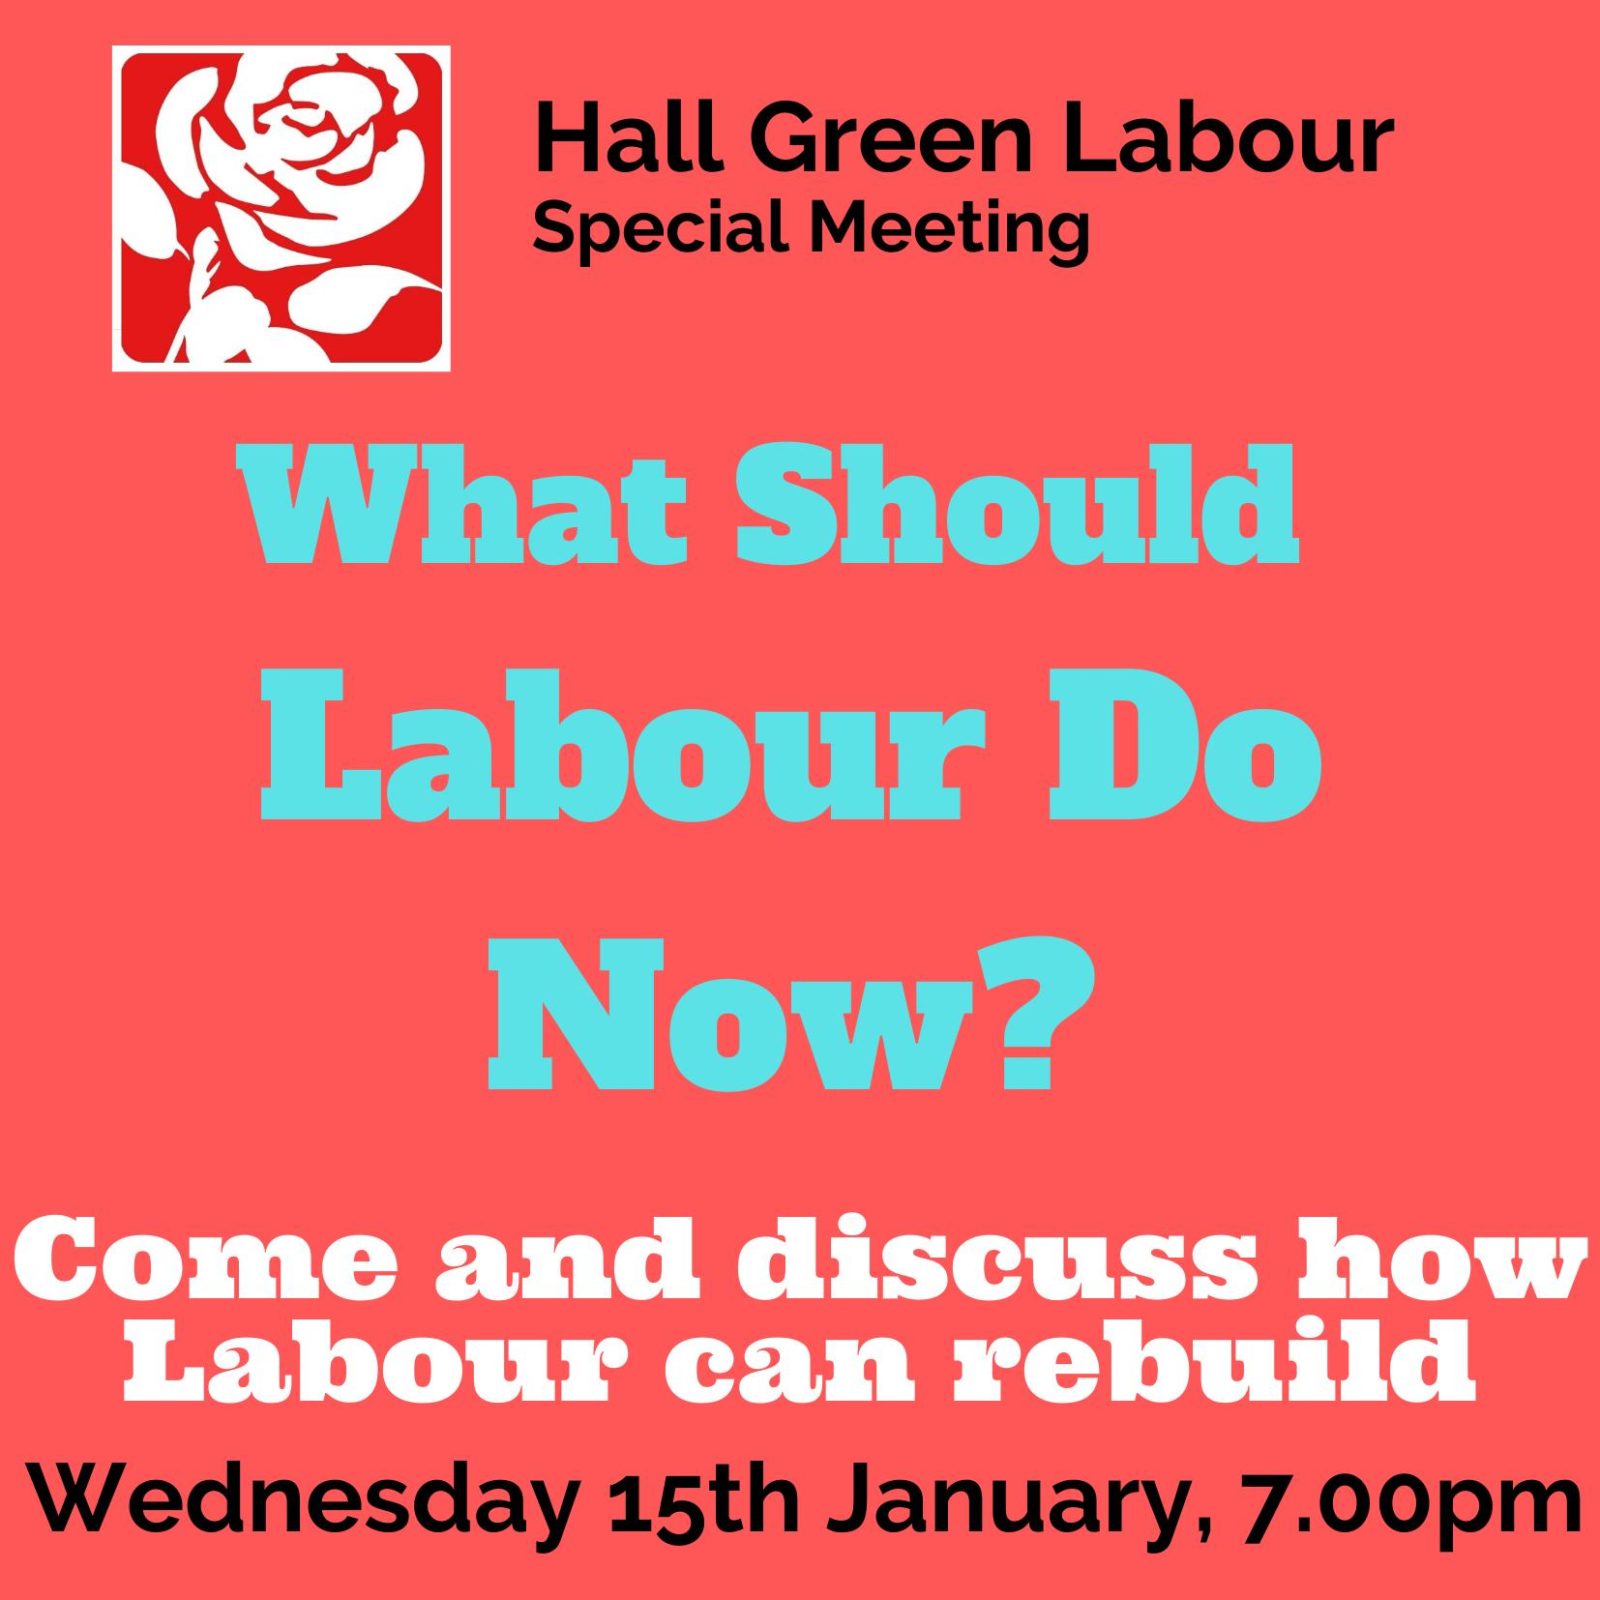 Image announcing a "What Should Labour Do Now?" meeting